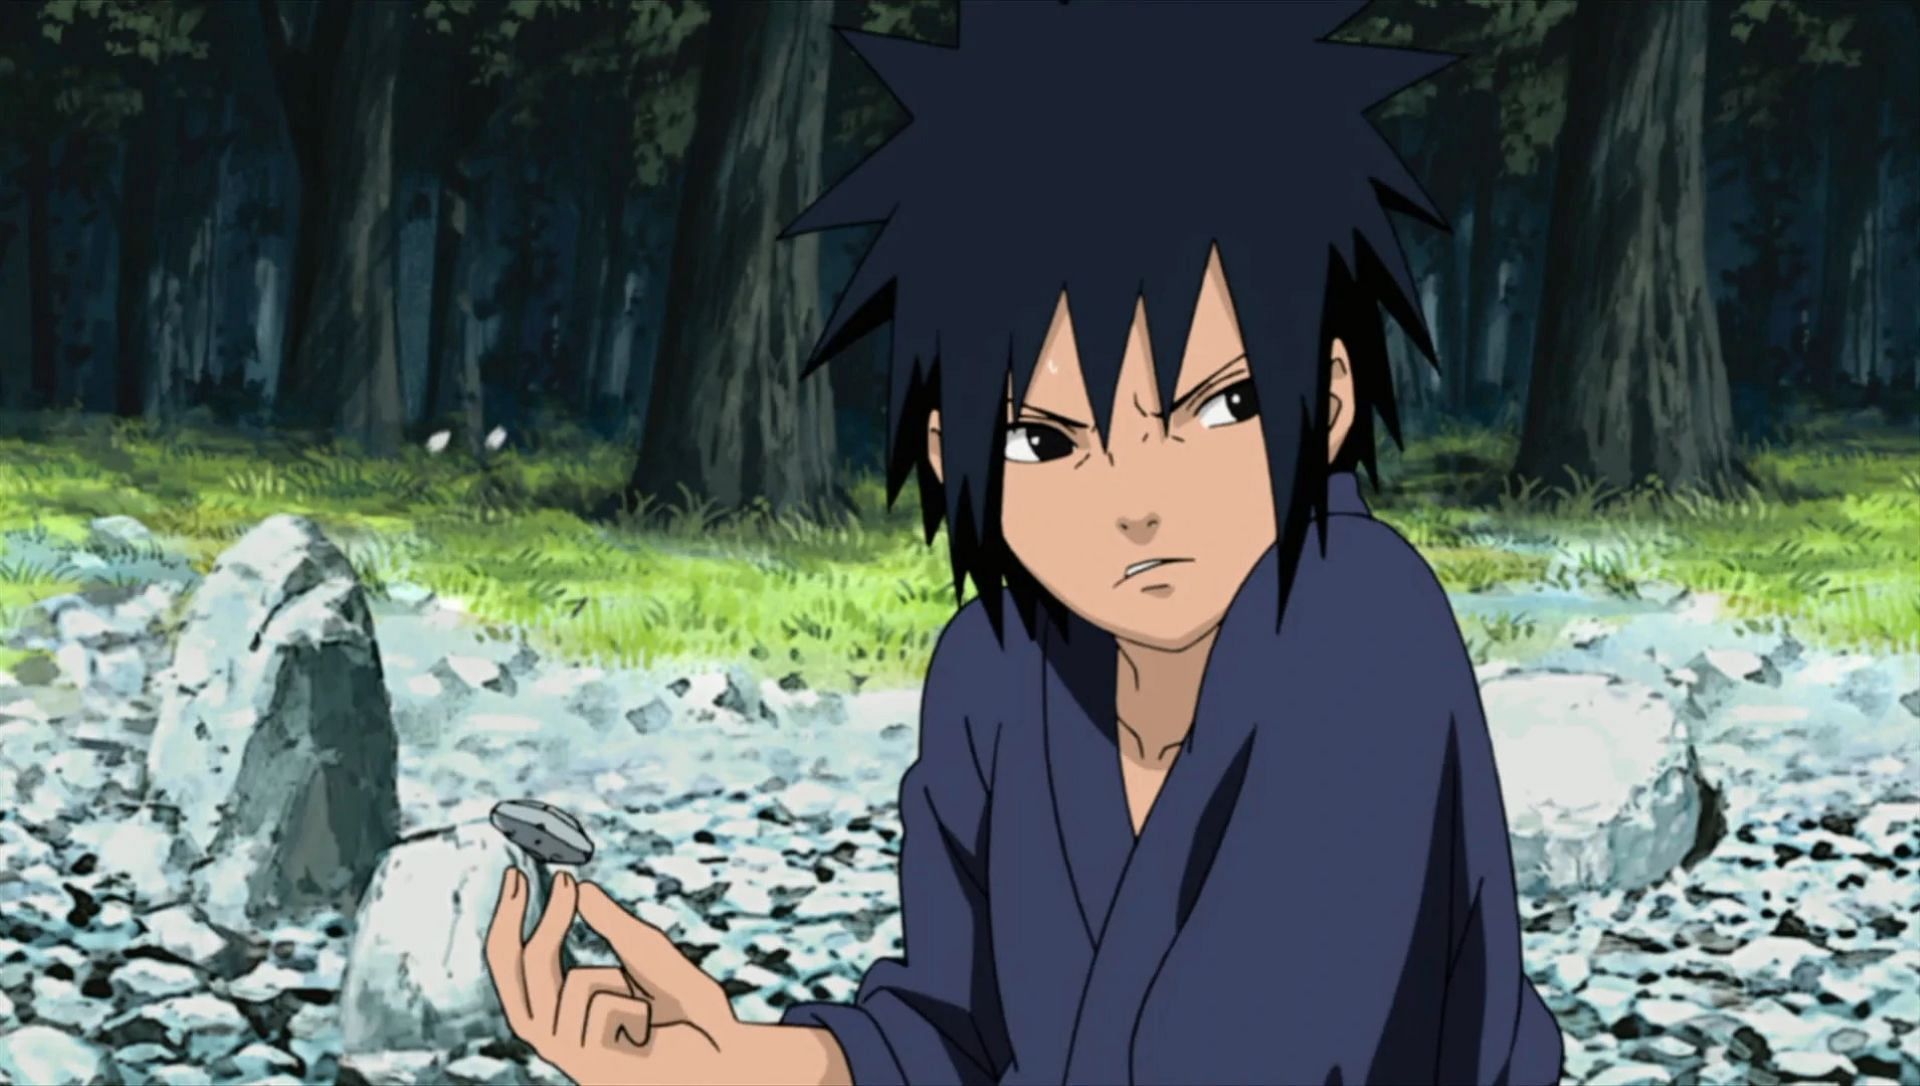 Madara in his childhood in Naruto anime (Image via Perriot)